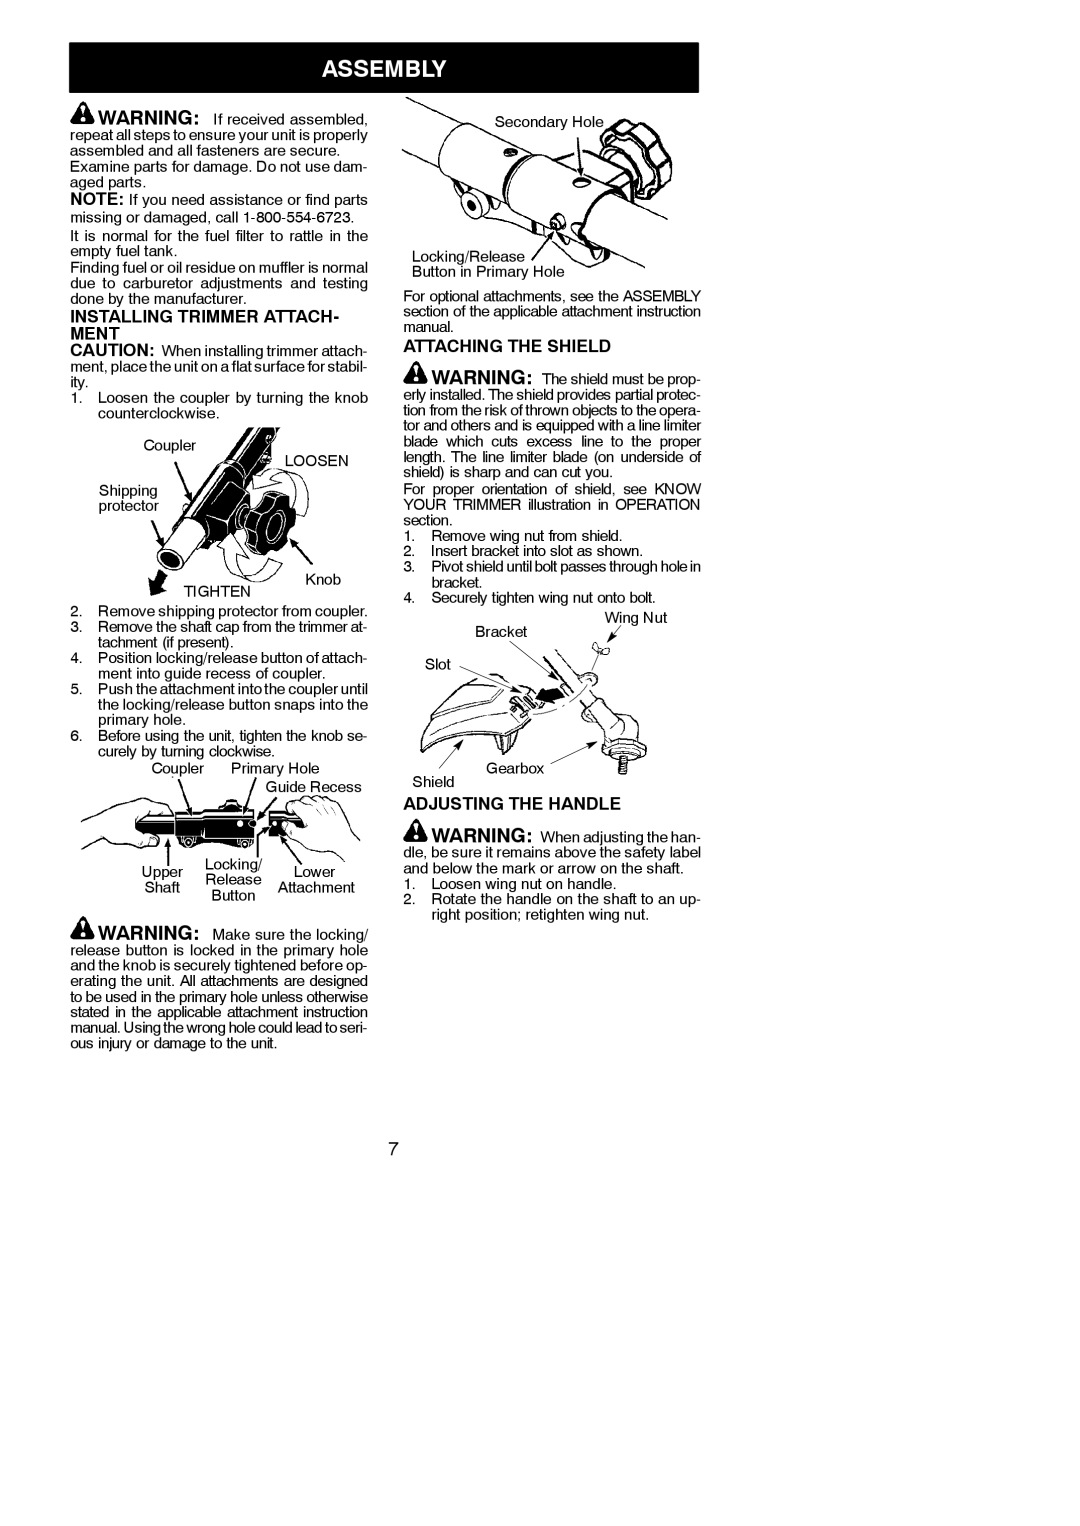 Poulan 545146921 instruction manual Assembly, Installing Trimmer ATTACH- Ment, Attaching the Shield, Adjusting the Handle 